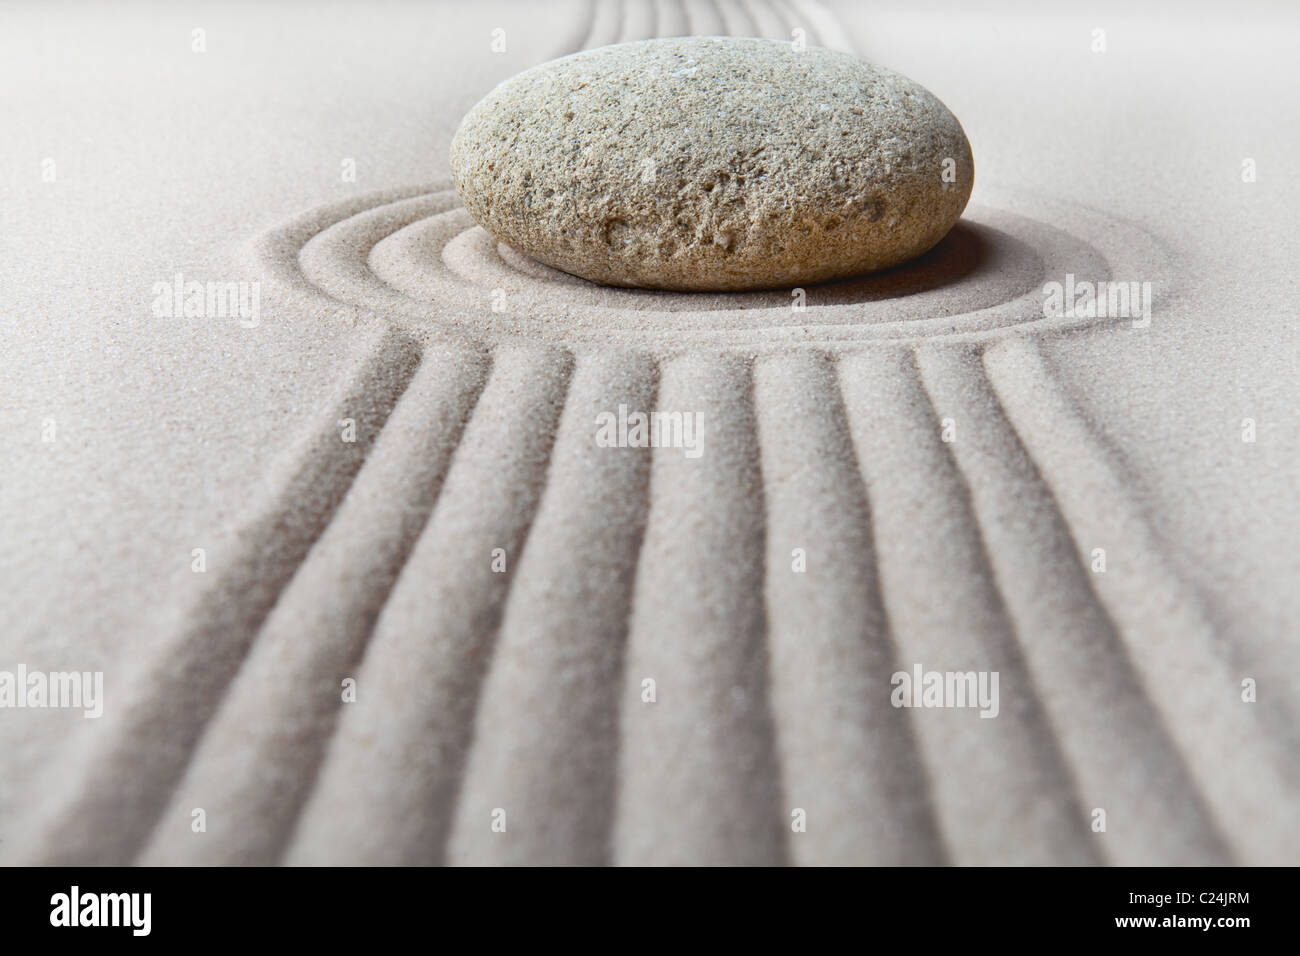 zen garden japanese garden zen stone with raked sand and round stone tranquility and balance ripples sand pattern Stock Photo